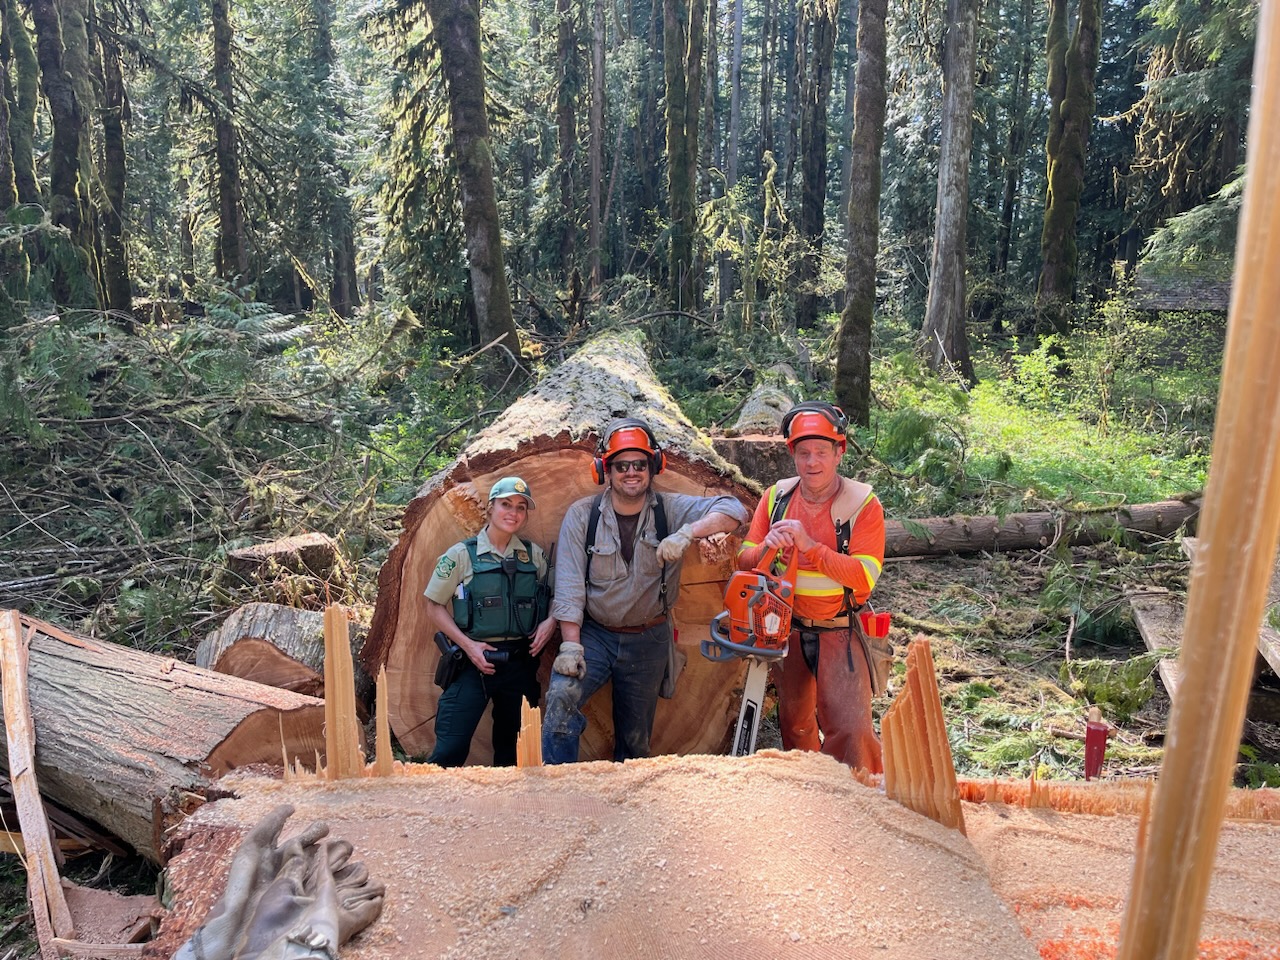 3 crewmembers stand in front of the large cedar, one is holding a chain saw